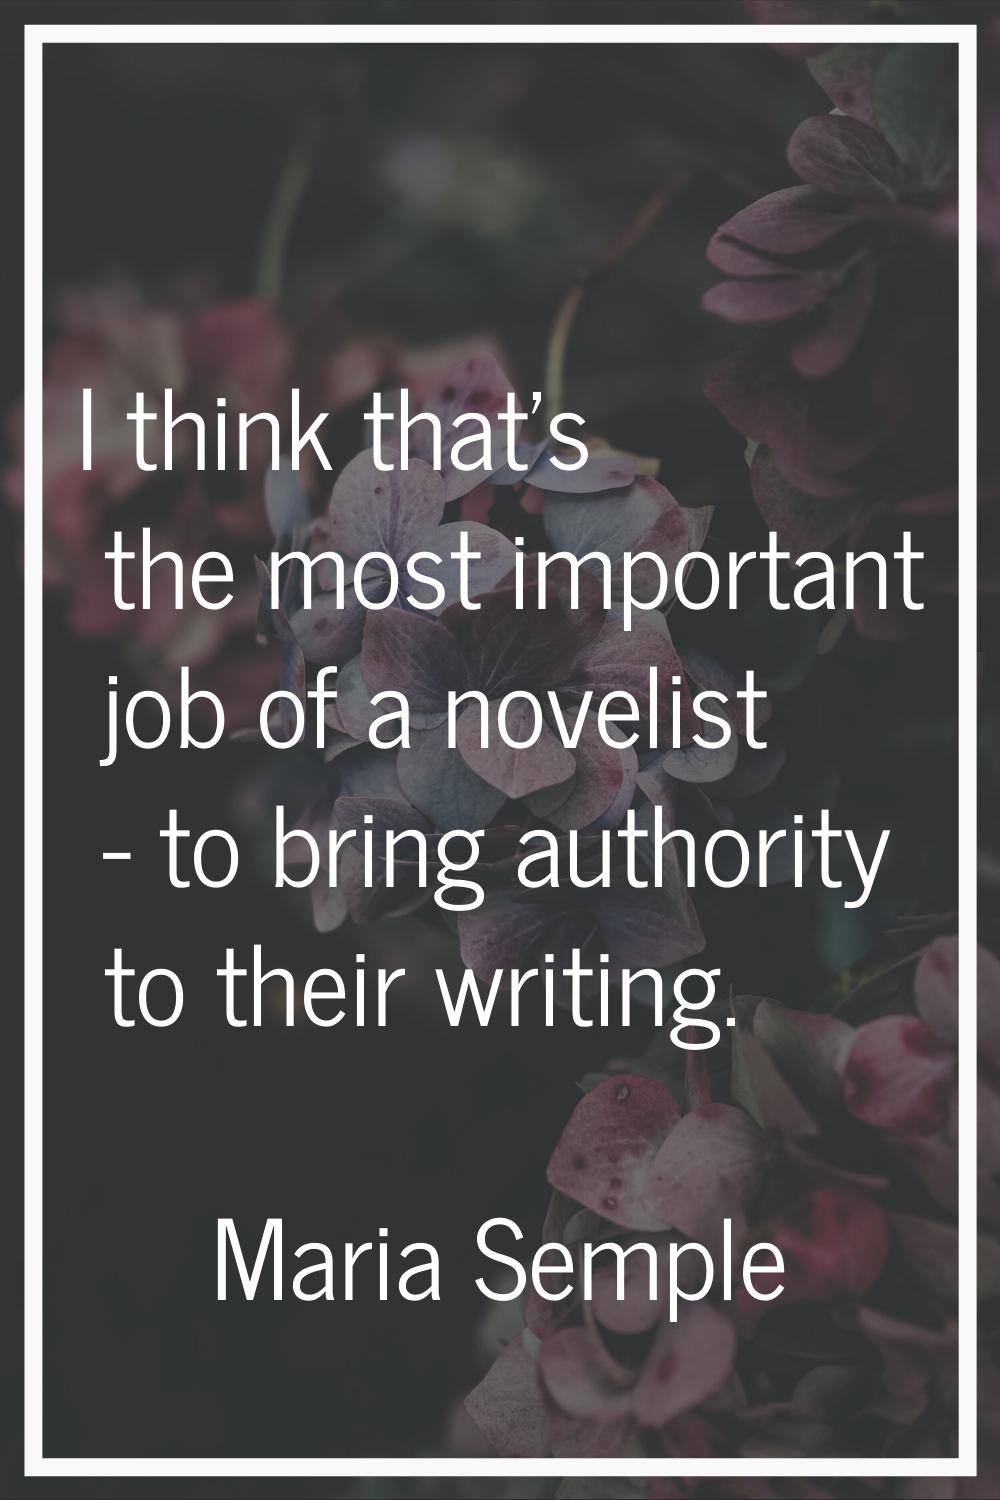 I think that's the most important job of a novelist - to bring authority to their writing.